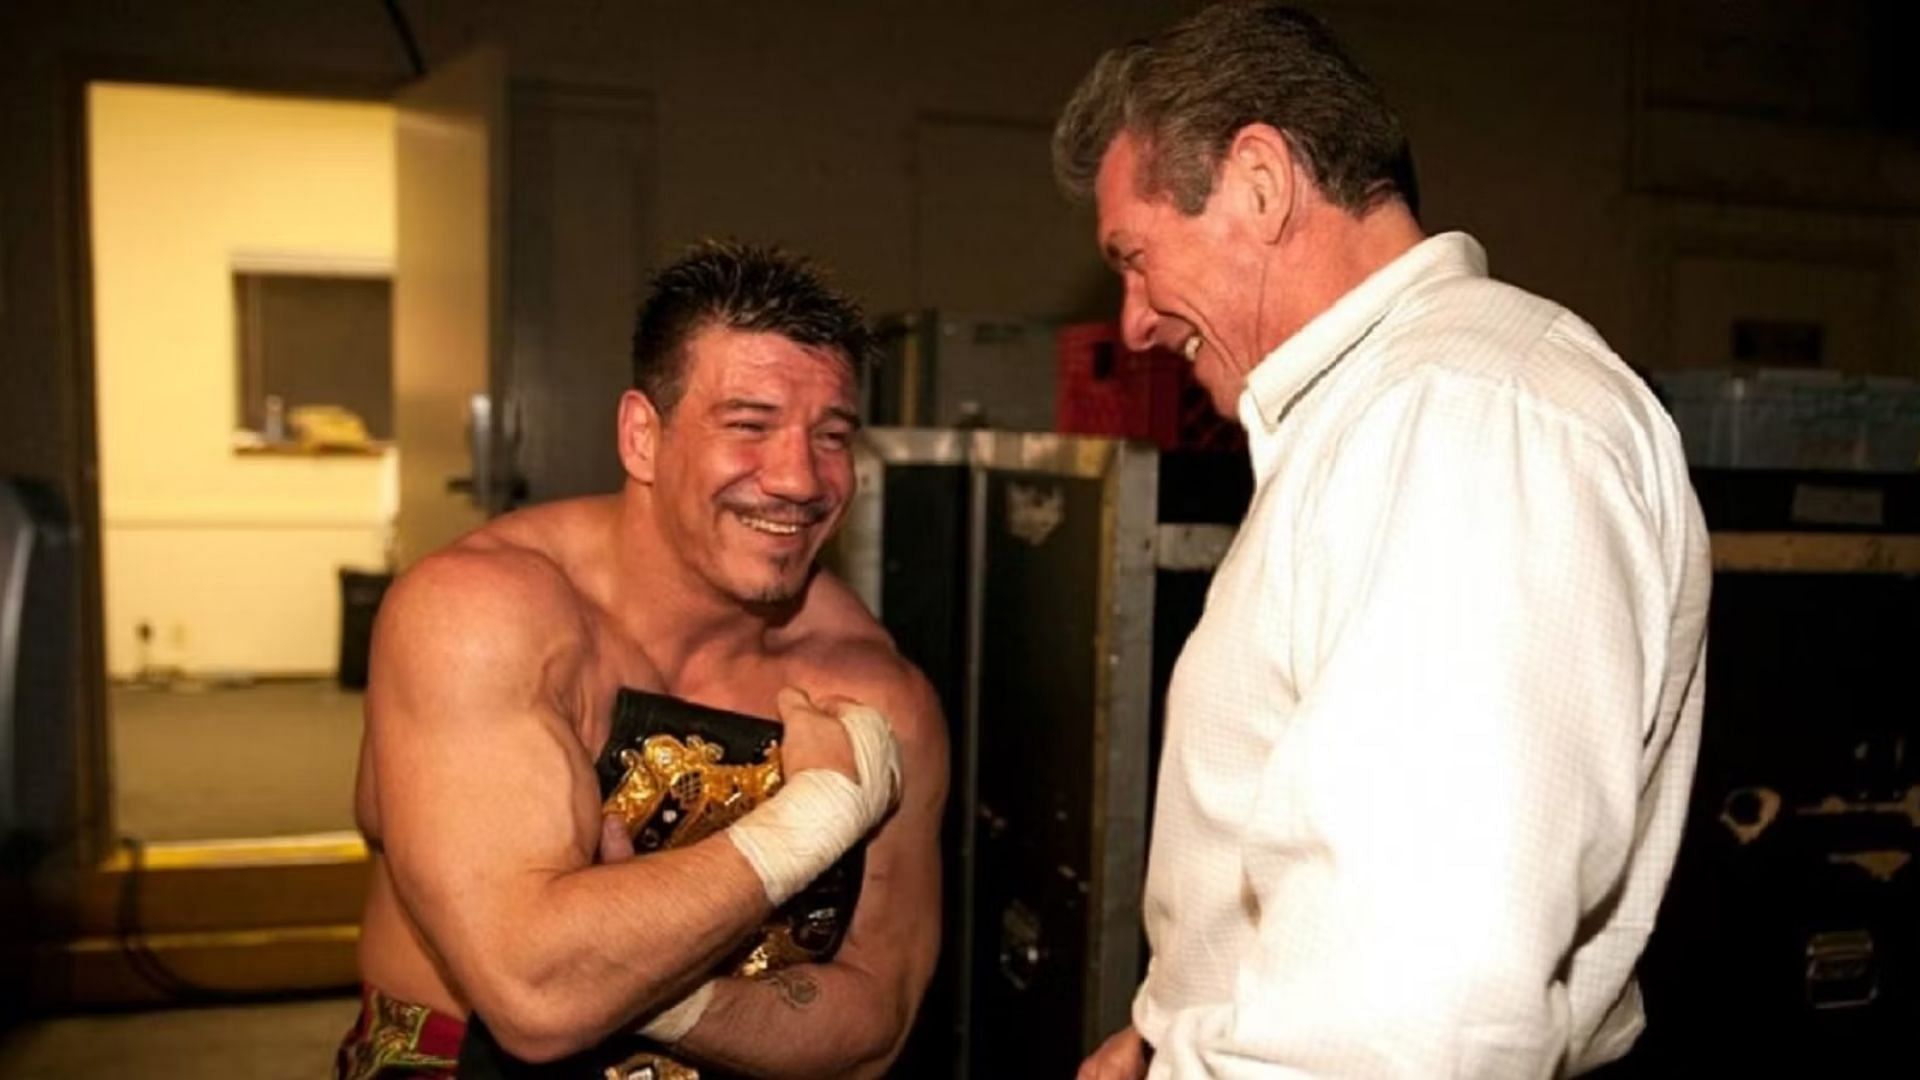 Eddie Guerrero is still remembered fondly in the pro-wrestling business